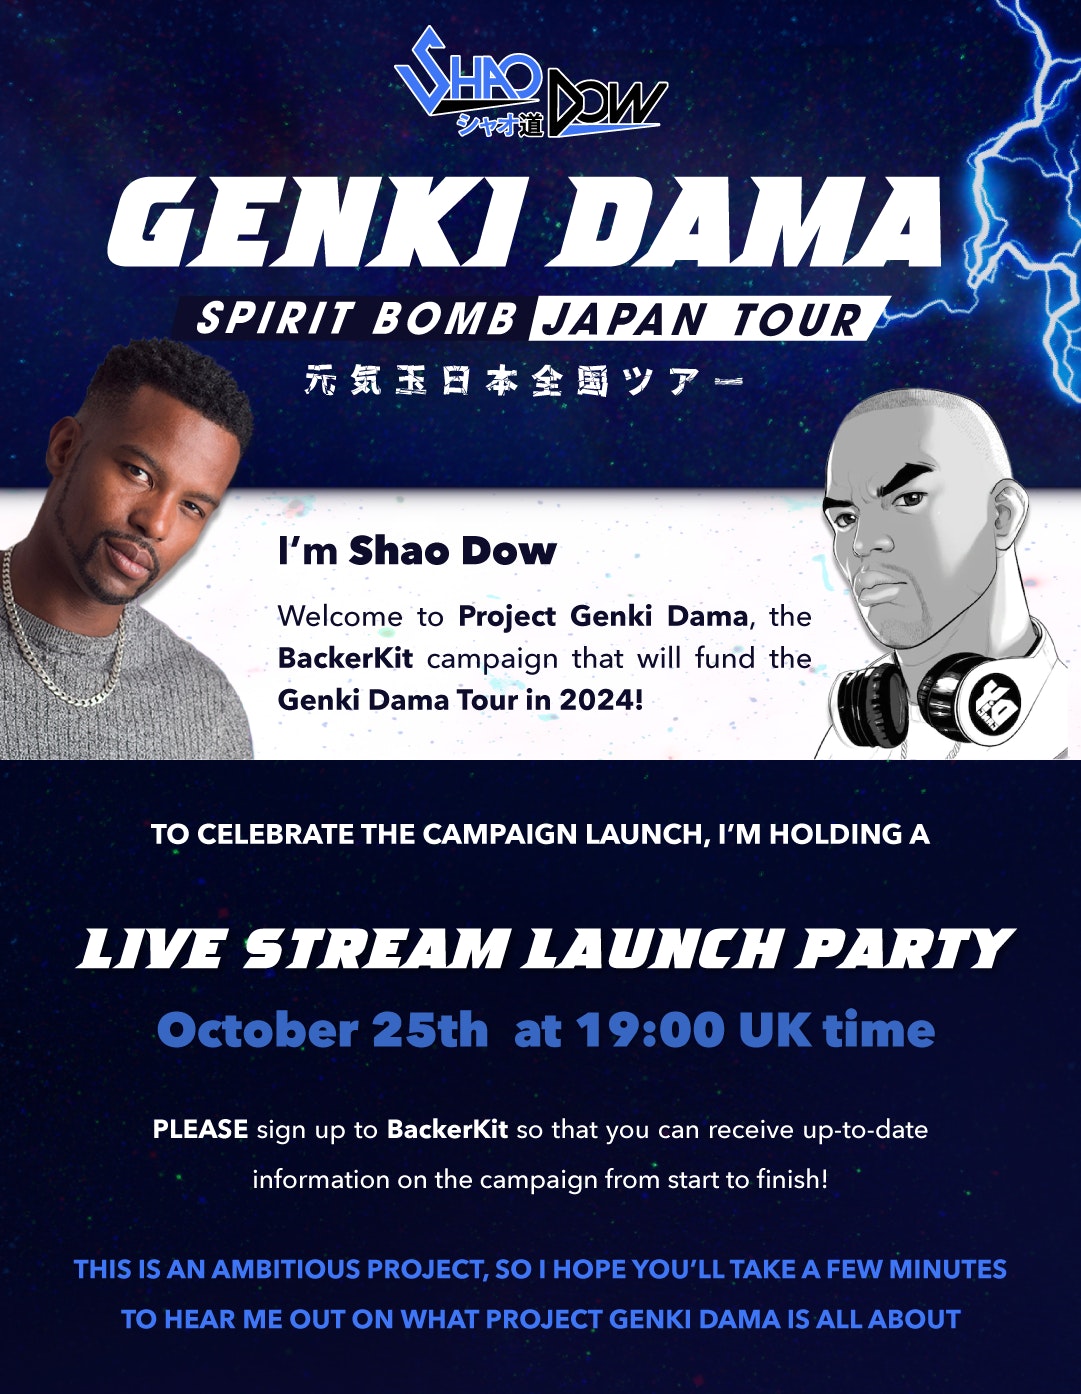 Project Genki Dama Launch Party